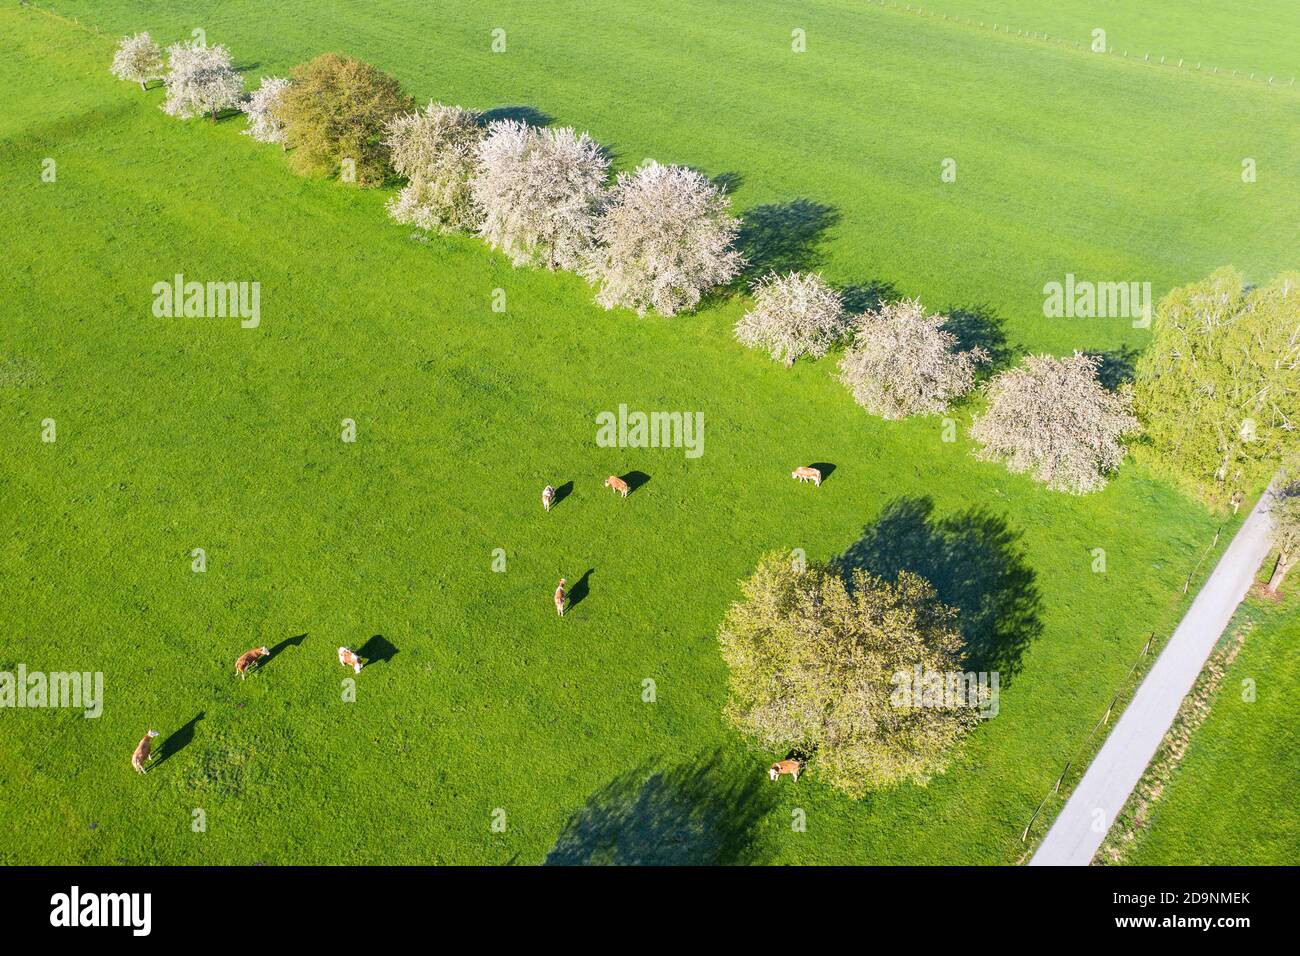 flowering cherry trees and cows in meadow, near Bad Feilnbach, drone image, Upper Bavaria, Bavaria, Germany Stock Photo